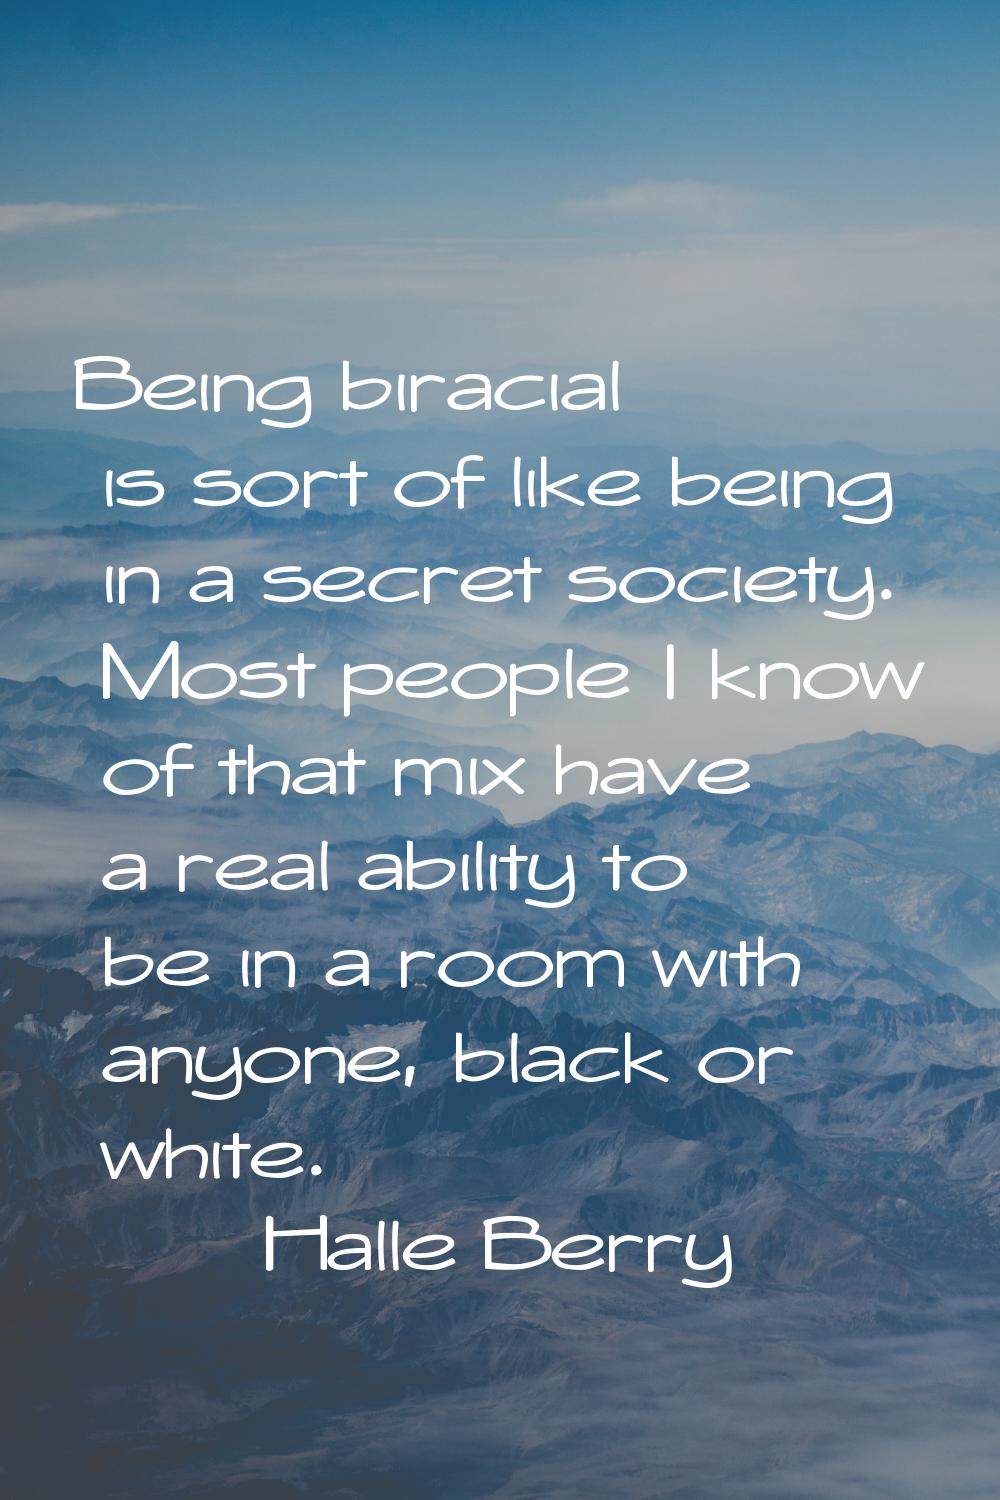 Being biracial is sort of like being in a secret society. Most people I know of that mix have a rea